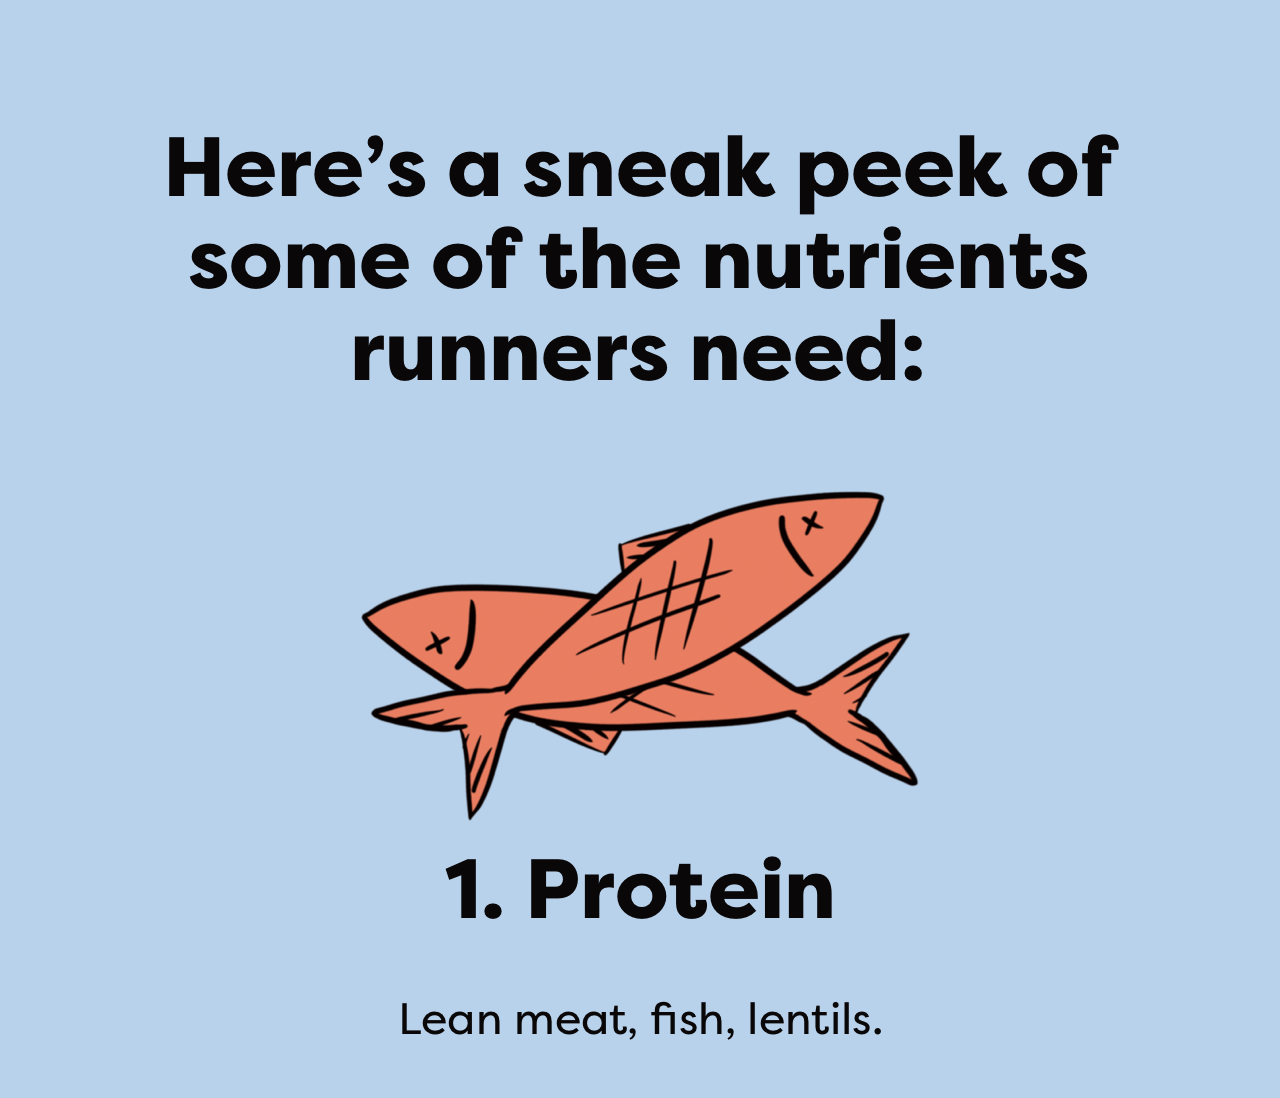 Here's a sneak peek of some of the nutrients runners need: 1. Protein - Lean meat, fish, lentils.